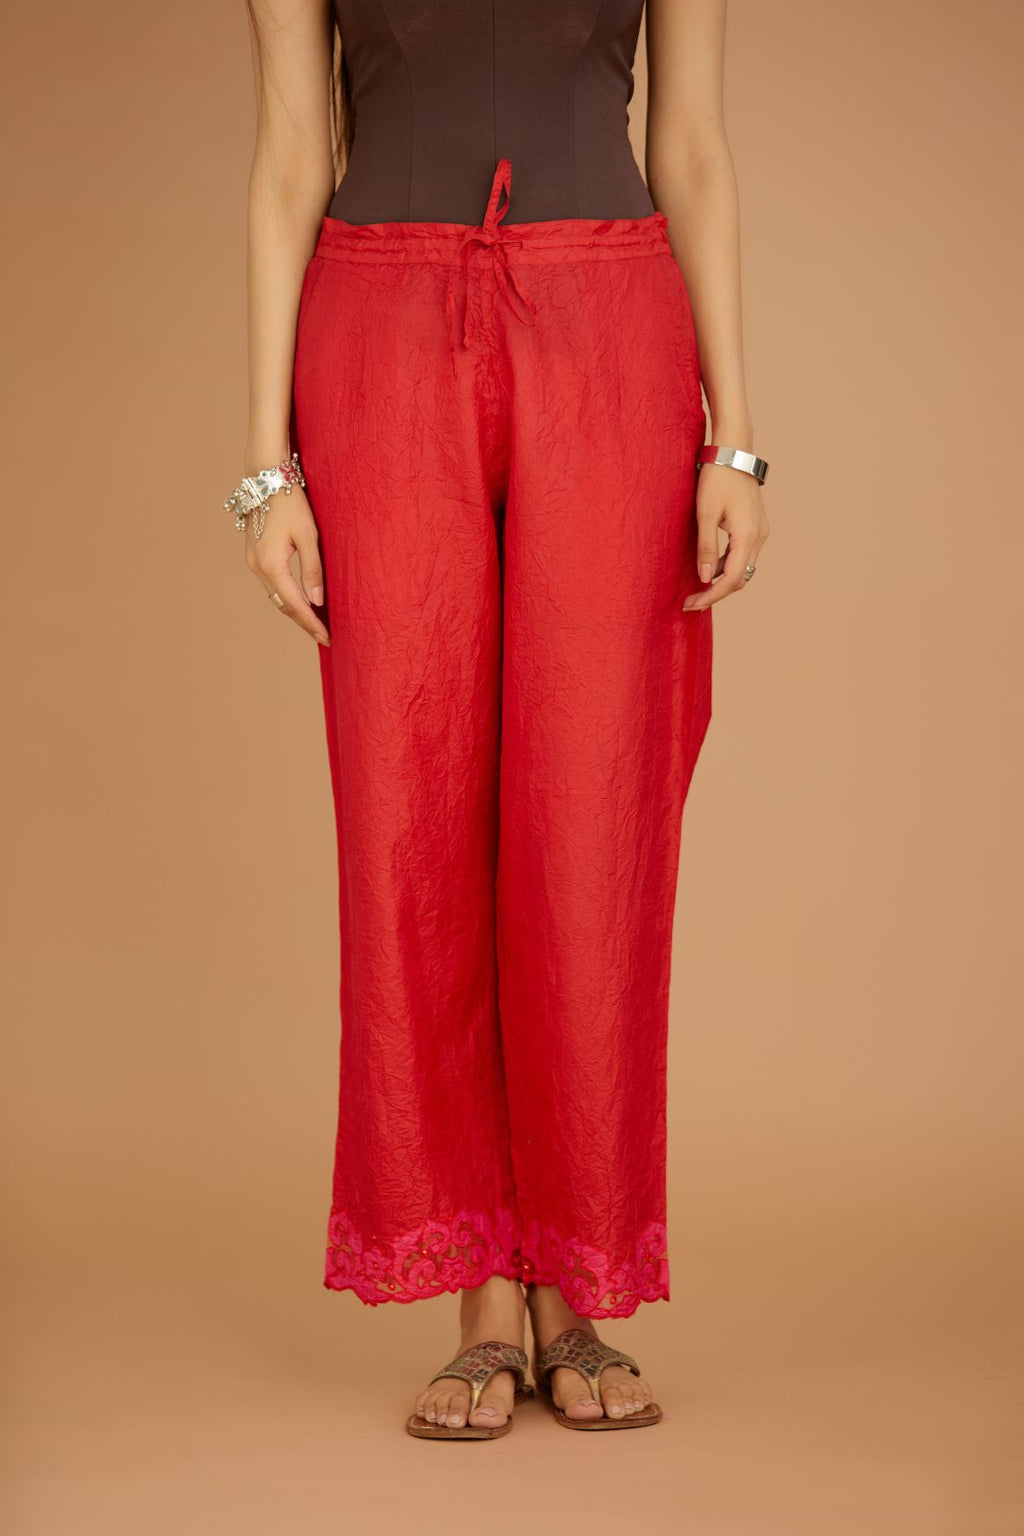 Red hand crushed silk pants with contrast silk and organza fabric cutwork embroidery at bottom hem, highlighted with hand attached mirrors.